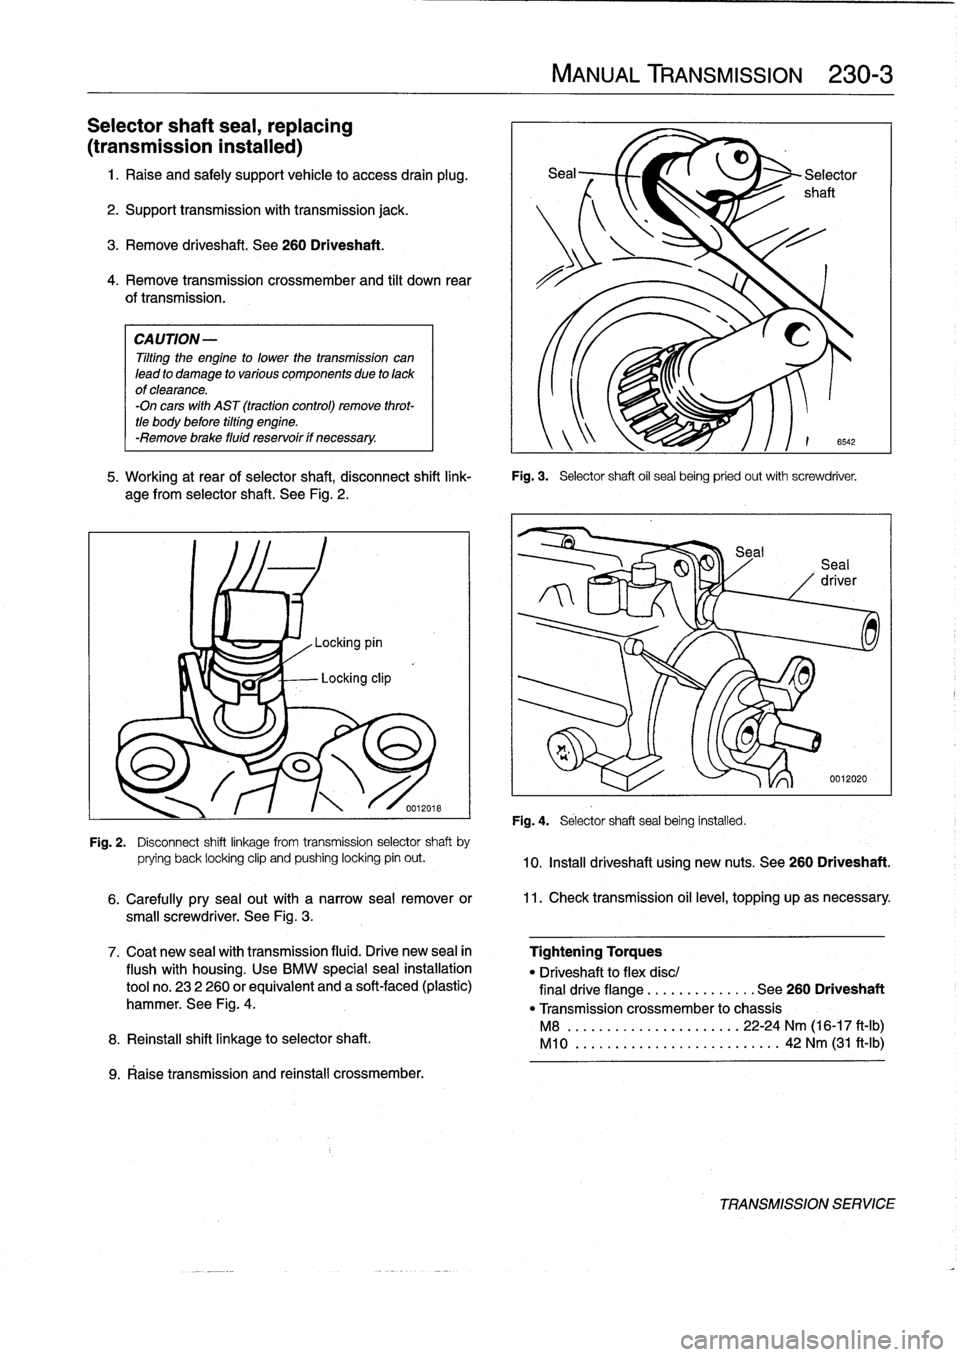 BMW 325i 1994 E36 Workshop Manual 
Selector
shaft
seal,
replacing

(transmission
instalied)

1
.
Raise
and
safely
support
vehicle
to
access
drain
plug
.

2
.
Support
transmission
with
transmission
jack
.

3
.
Remove
driveshaft
.
See
2